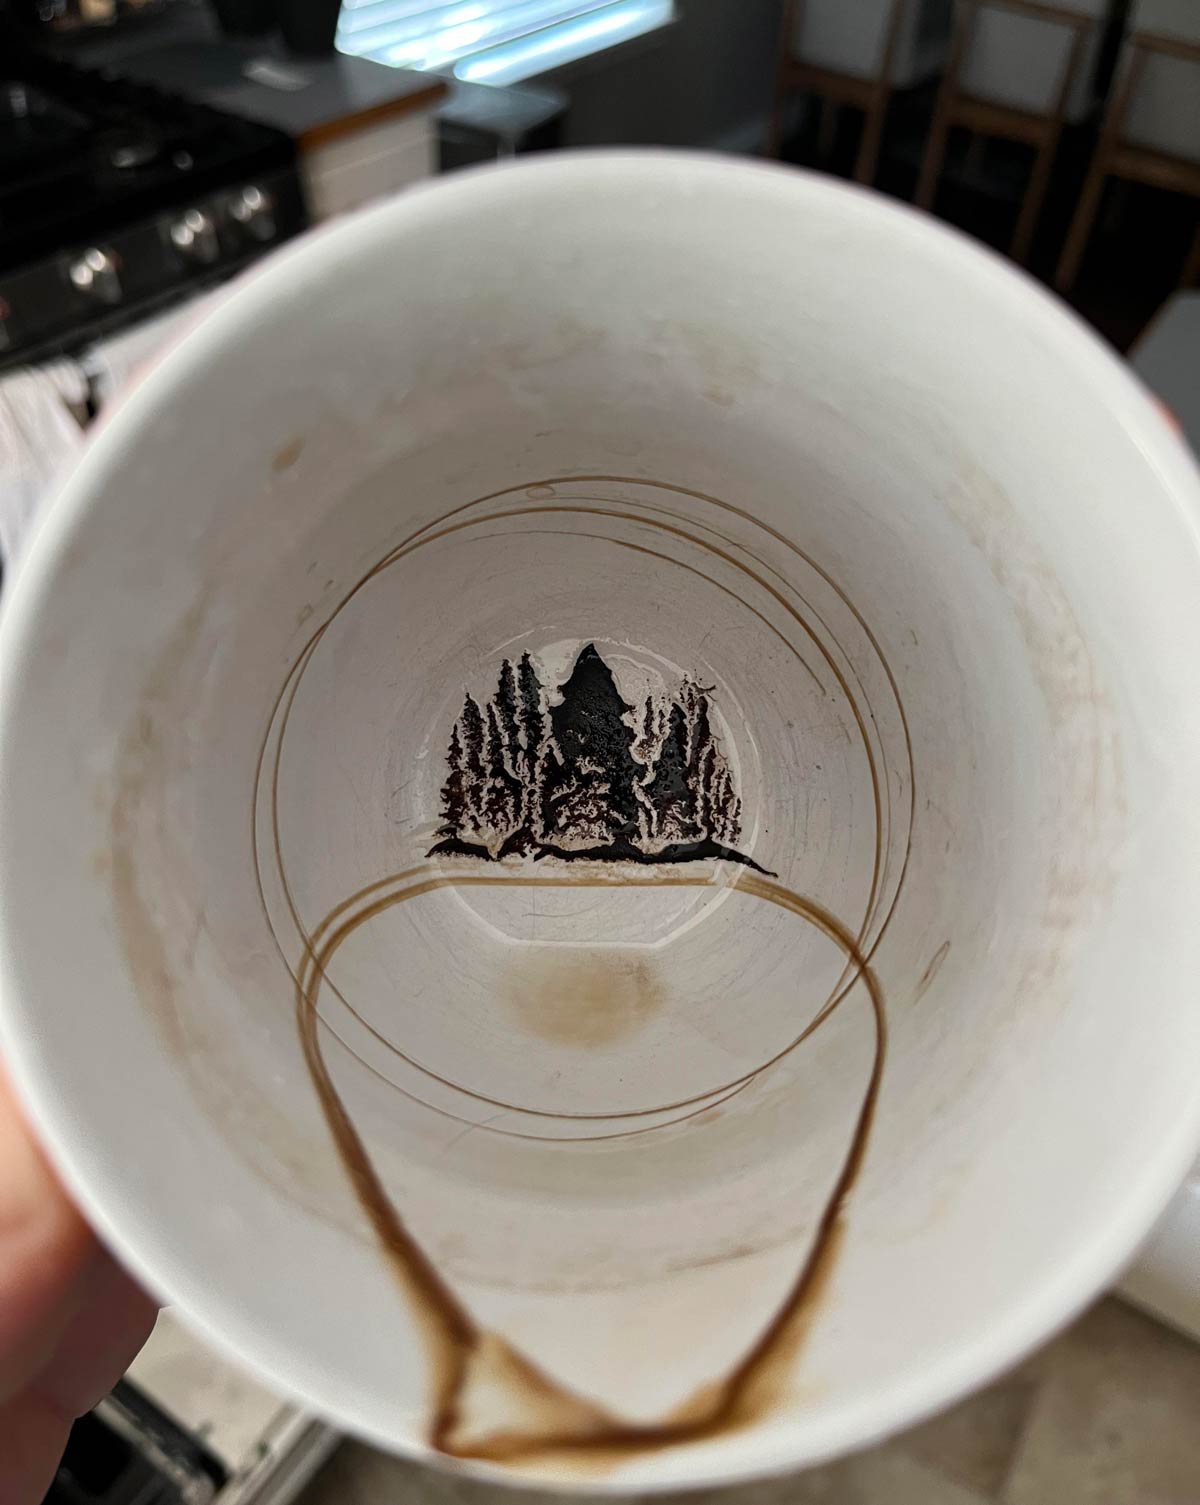 My dirty coffee cup looks like a pine forest